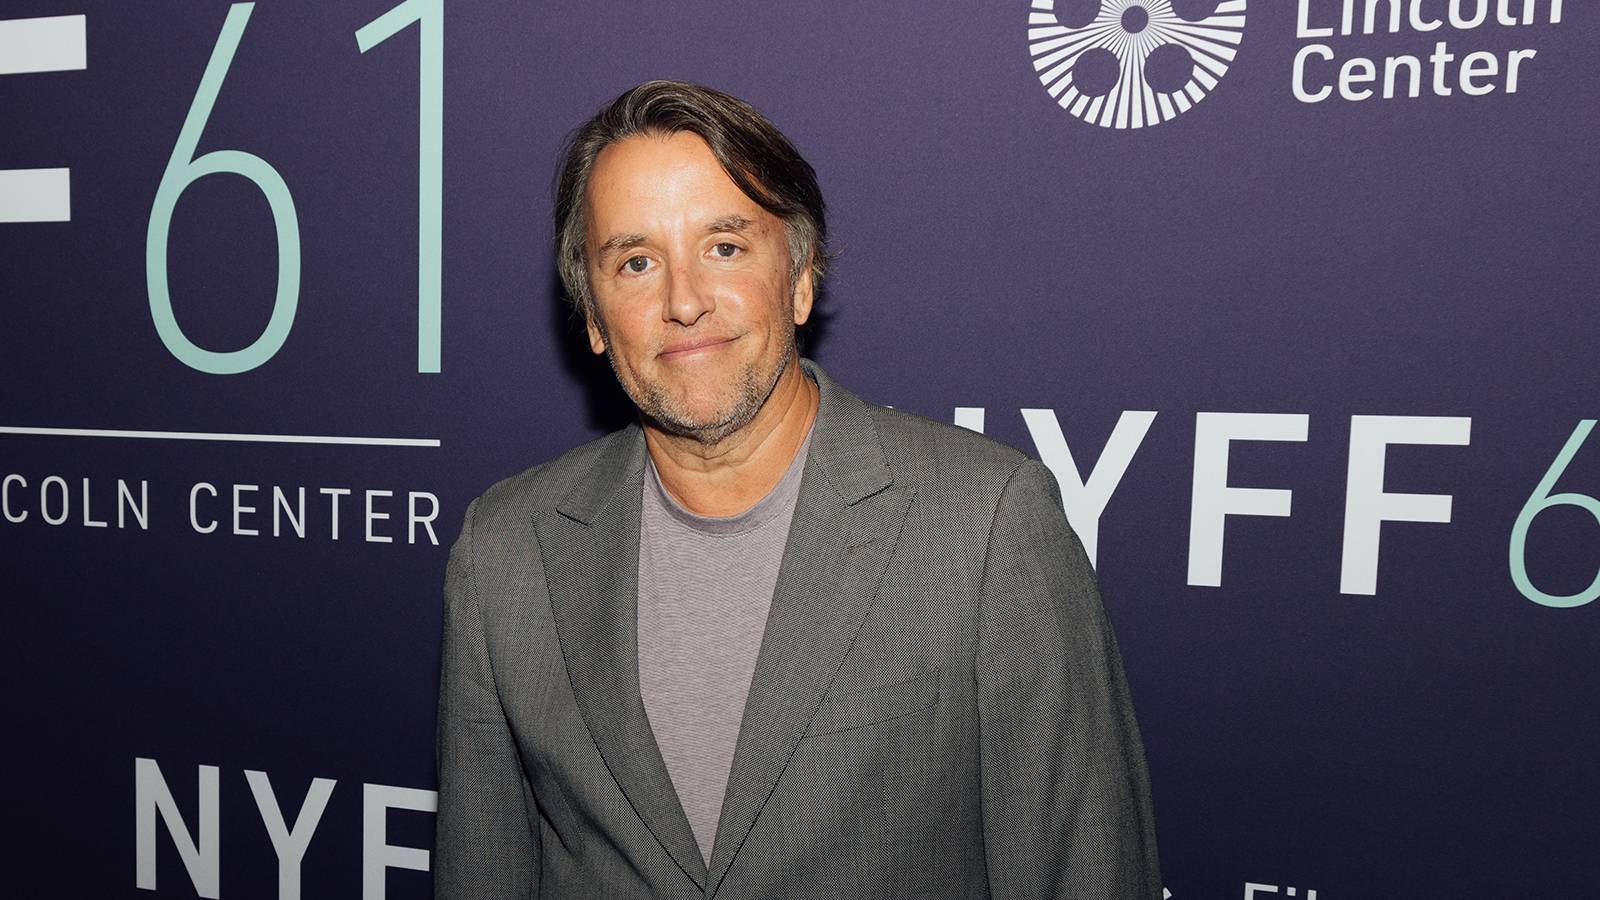 Richard Linklater's 'Hit Man' Should Be Seen in Theaters